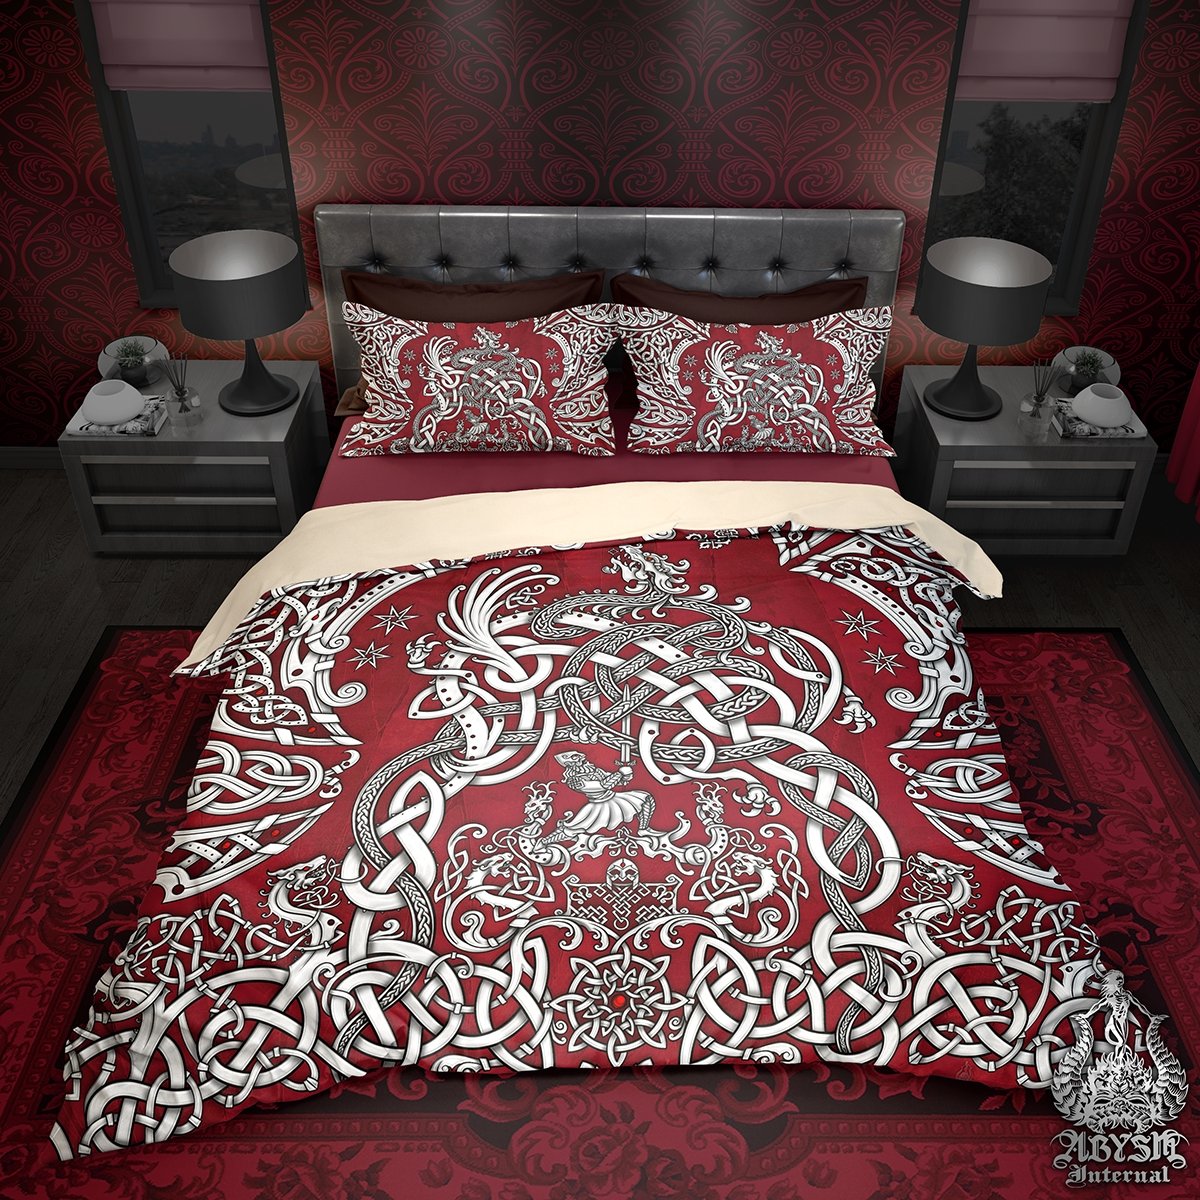 Viking Bedding Set, Comforter and Duvet, Norse Bed Cover and Bedroom Decor, Nordic Art, Sigurd kills Dragon Fafnir, King, Queen and Twin Size - White Red - Abysm Internal